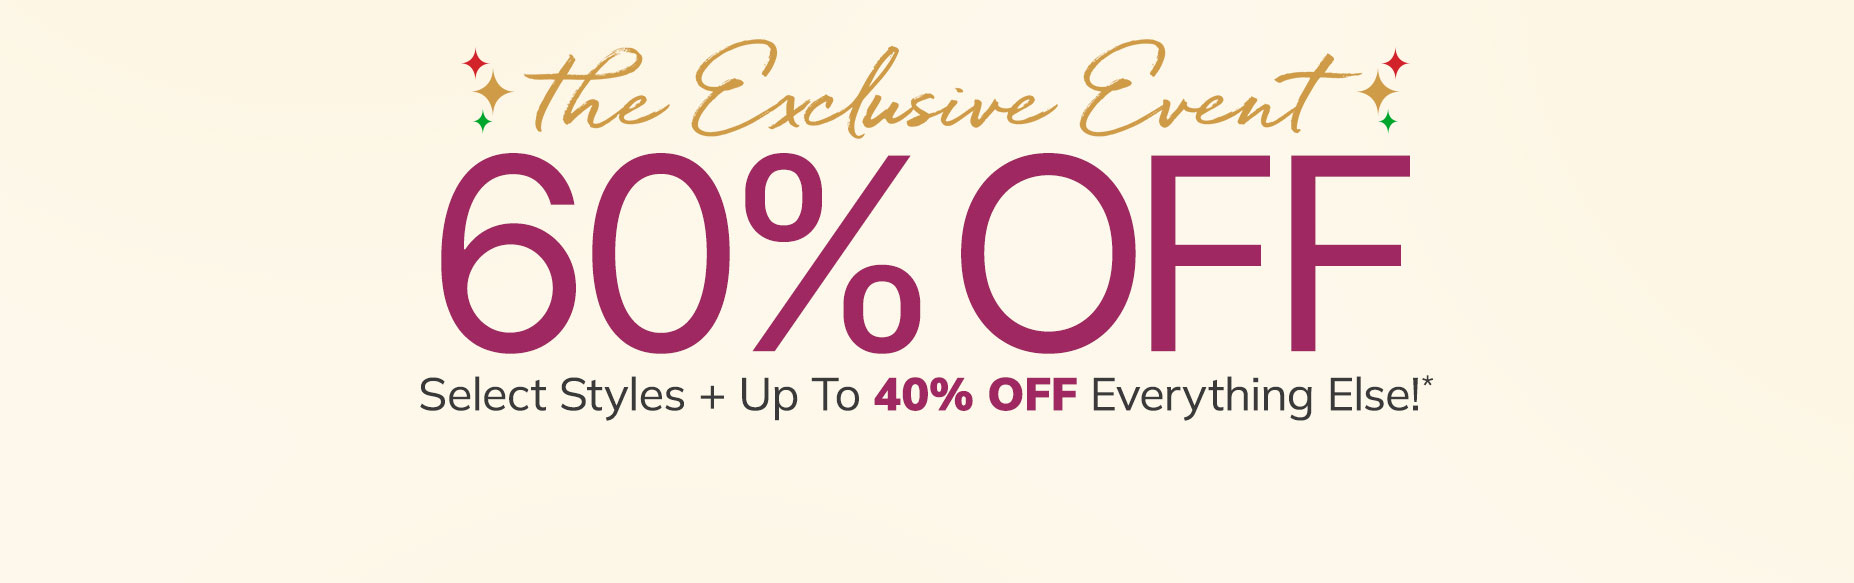 the exclusive event 60% off select styles + up to 40% offf everything else